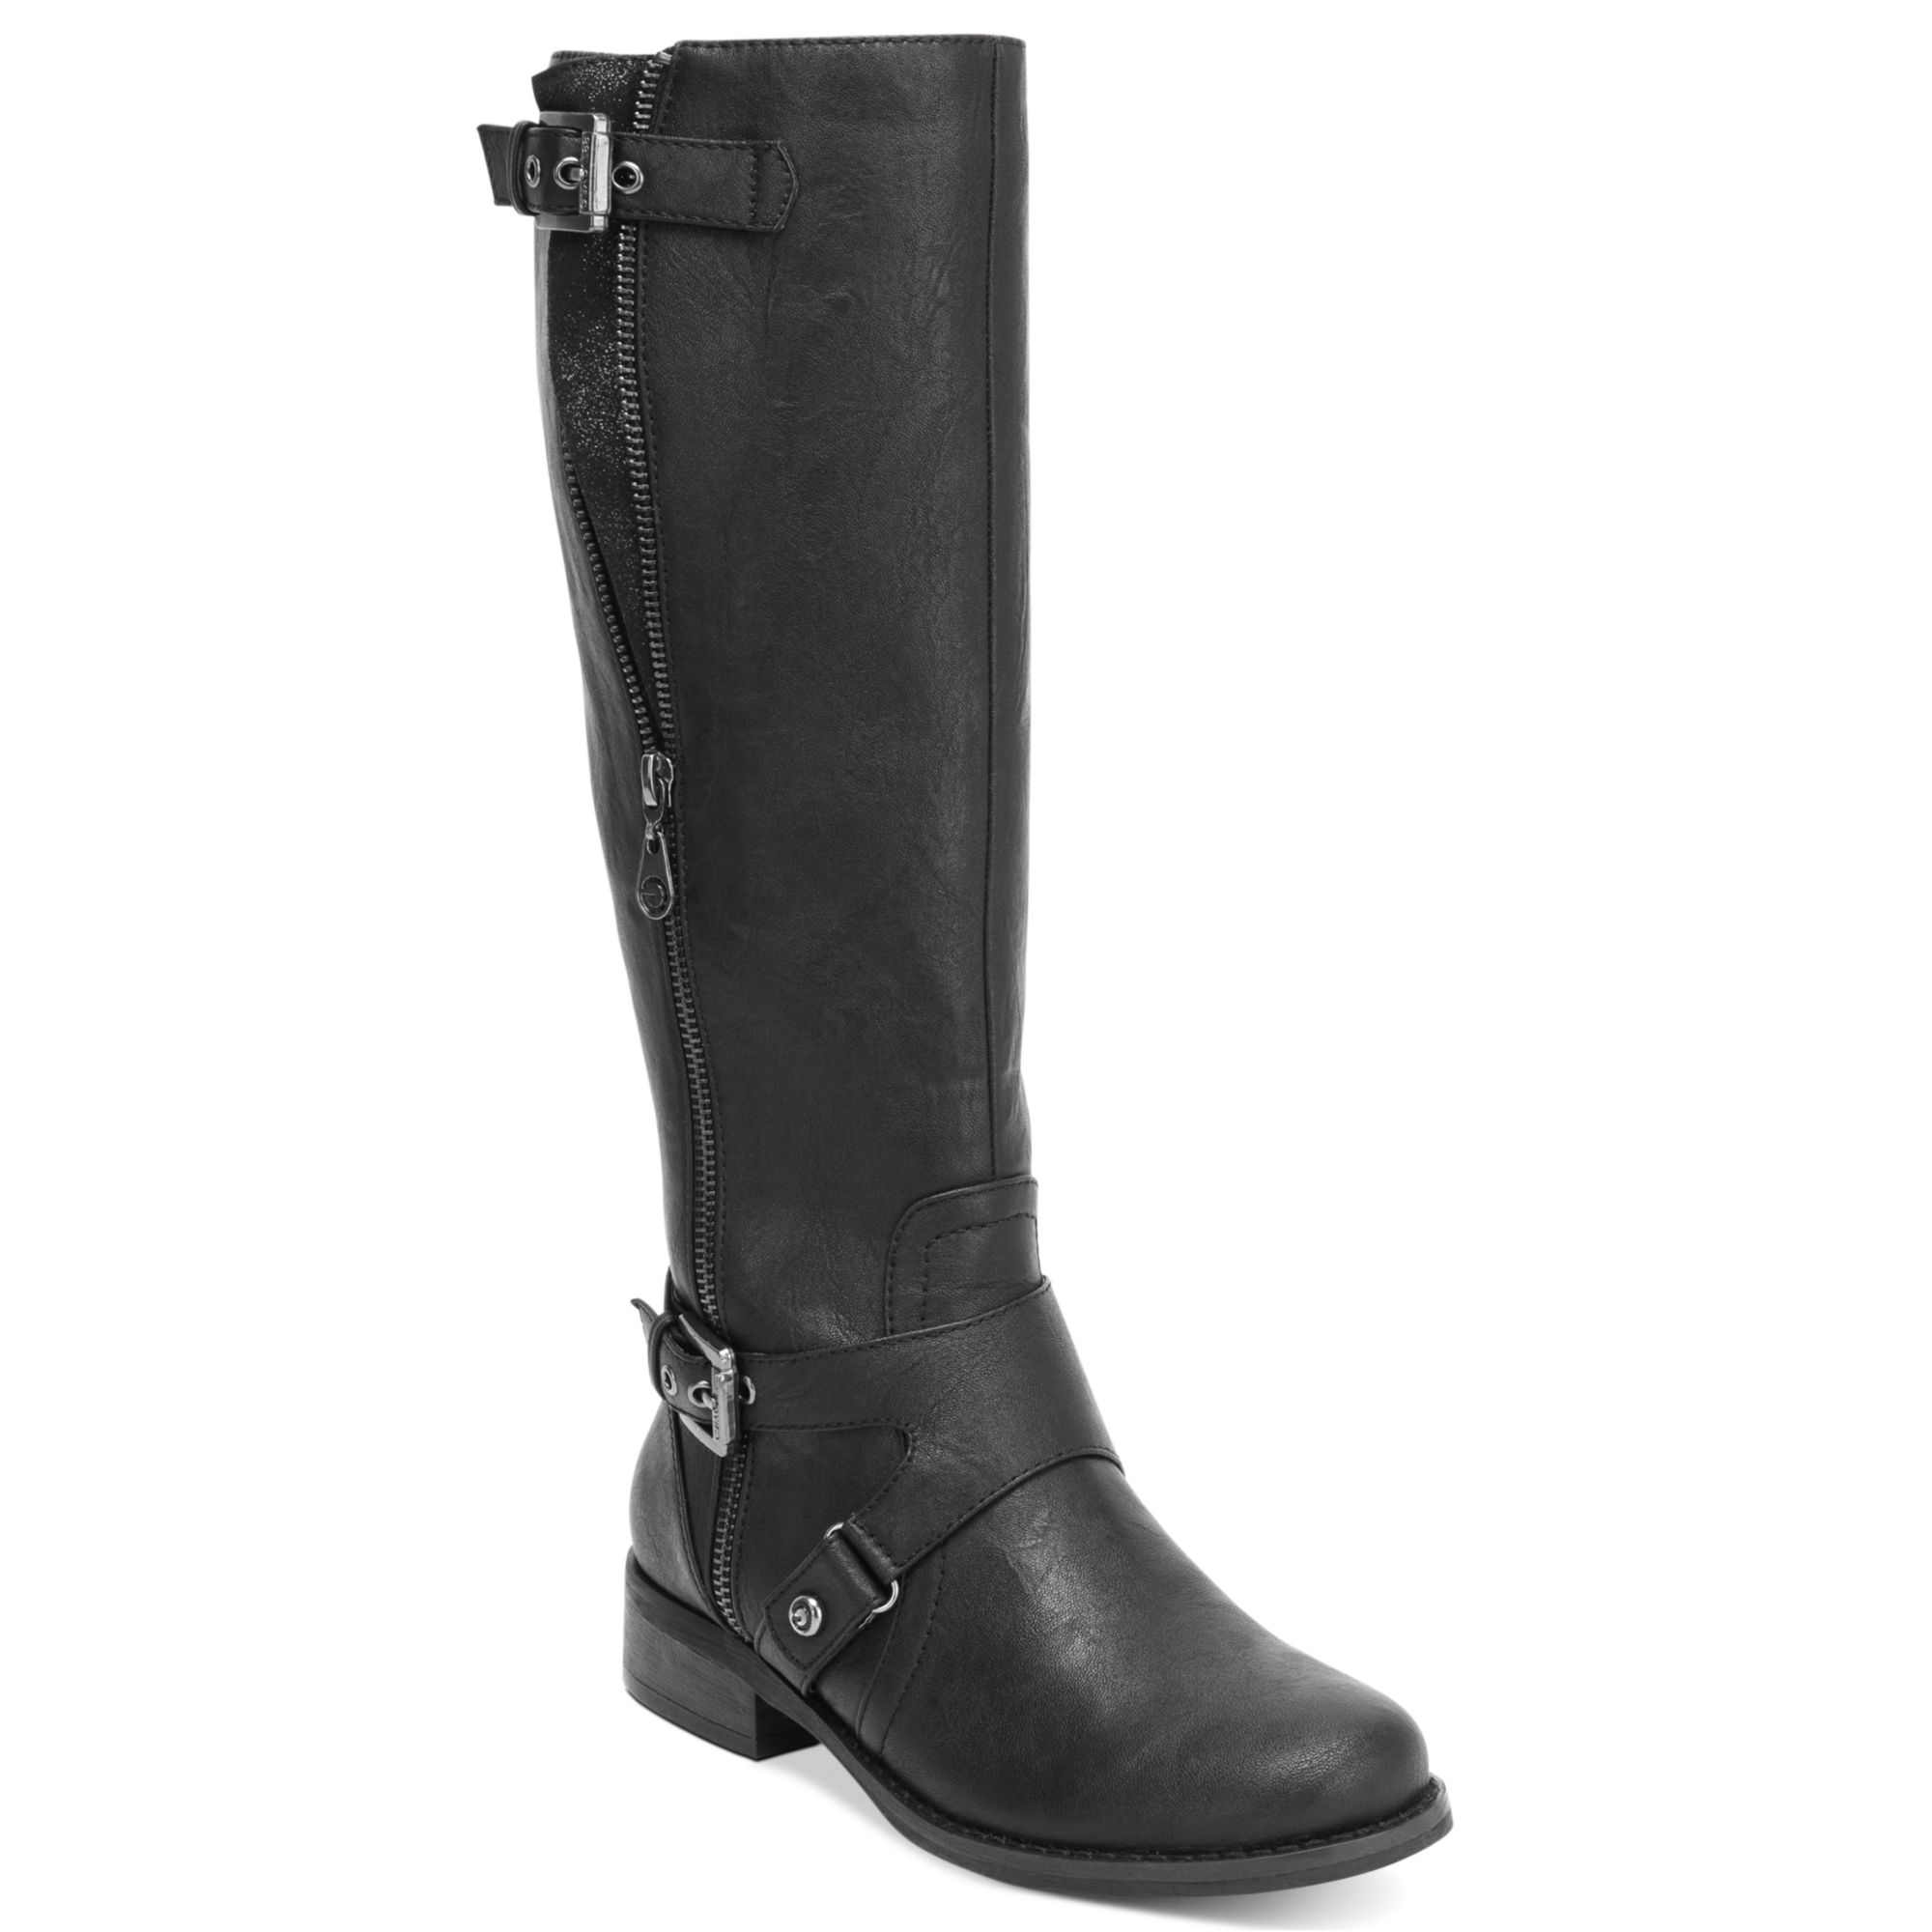 G by Guess G By Guess Womens Shoes Hertlez Tall Shaft Wide Calf Boots ...